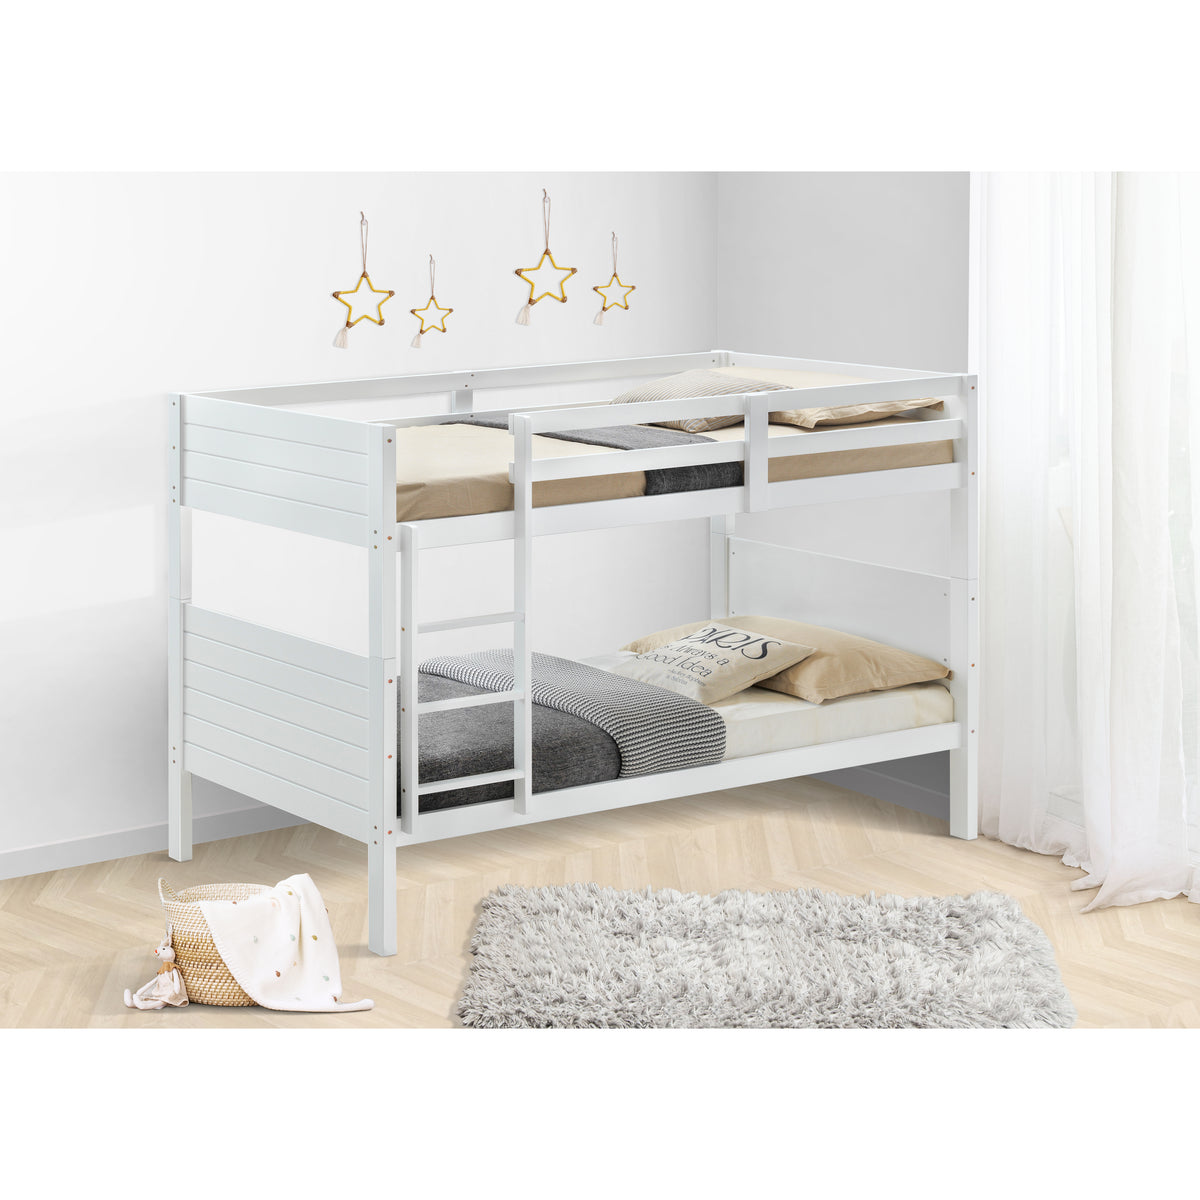 Zinnia Single Bunk Bed Frame Solid Rubber Timber Wood Loft Furniture - White